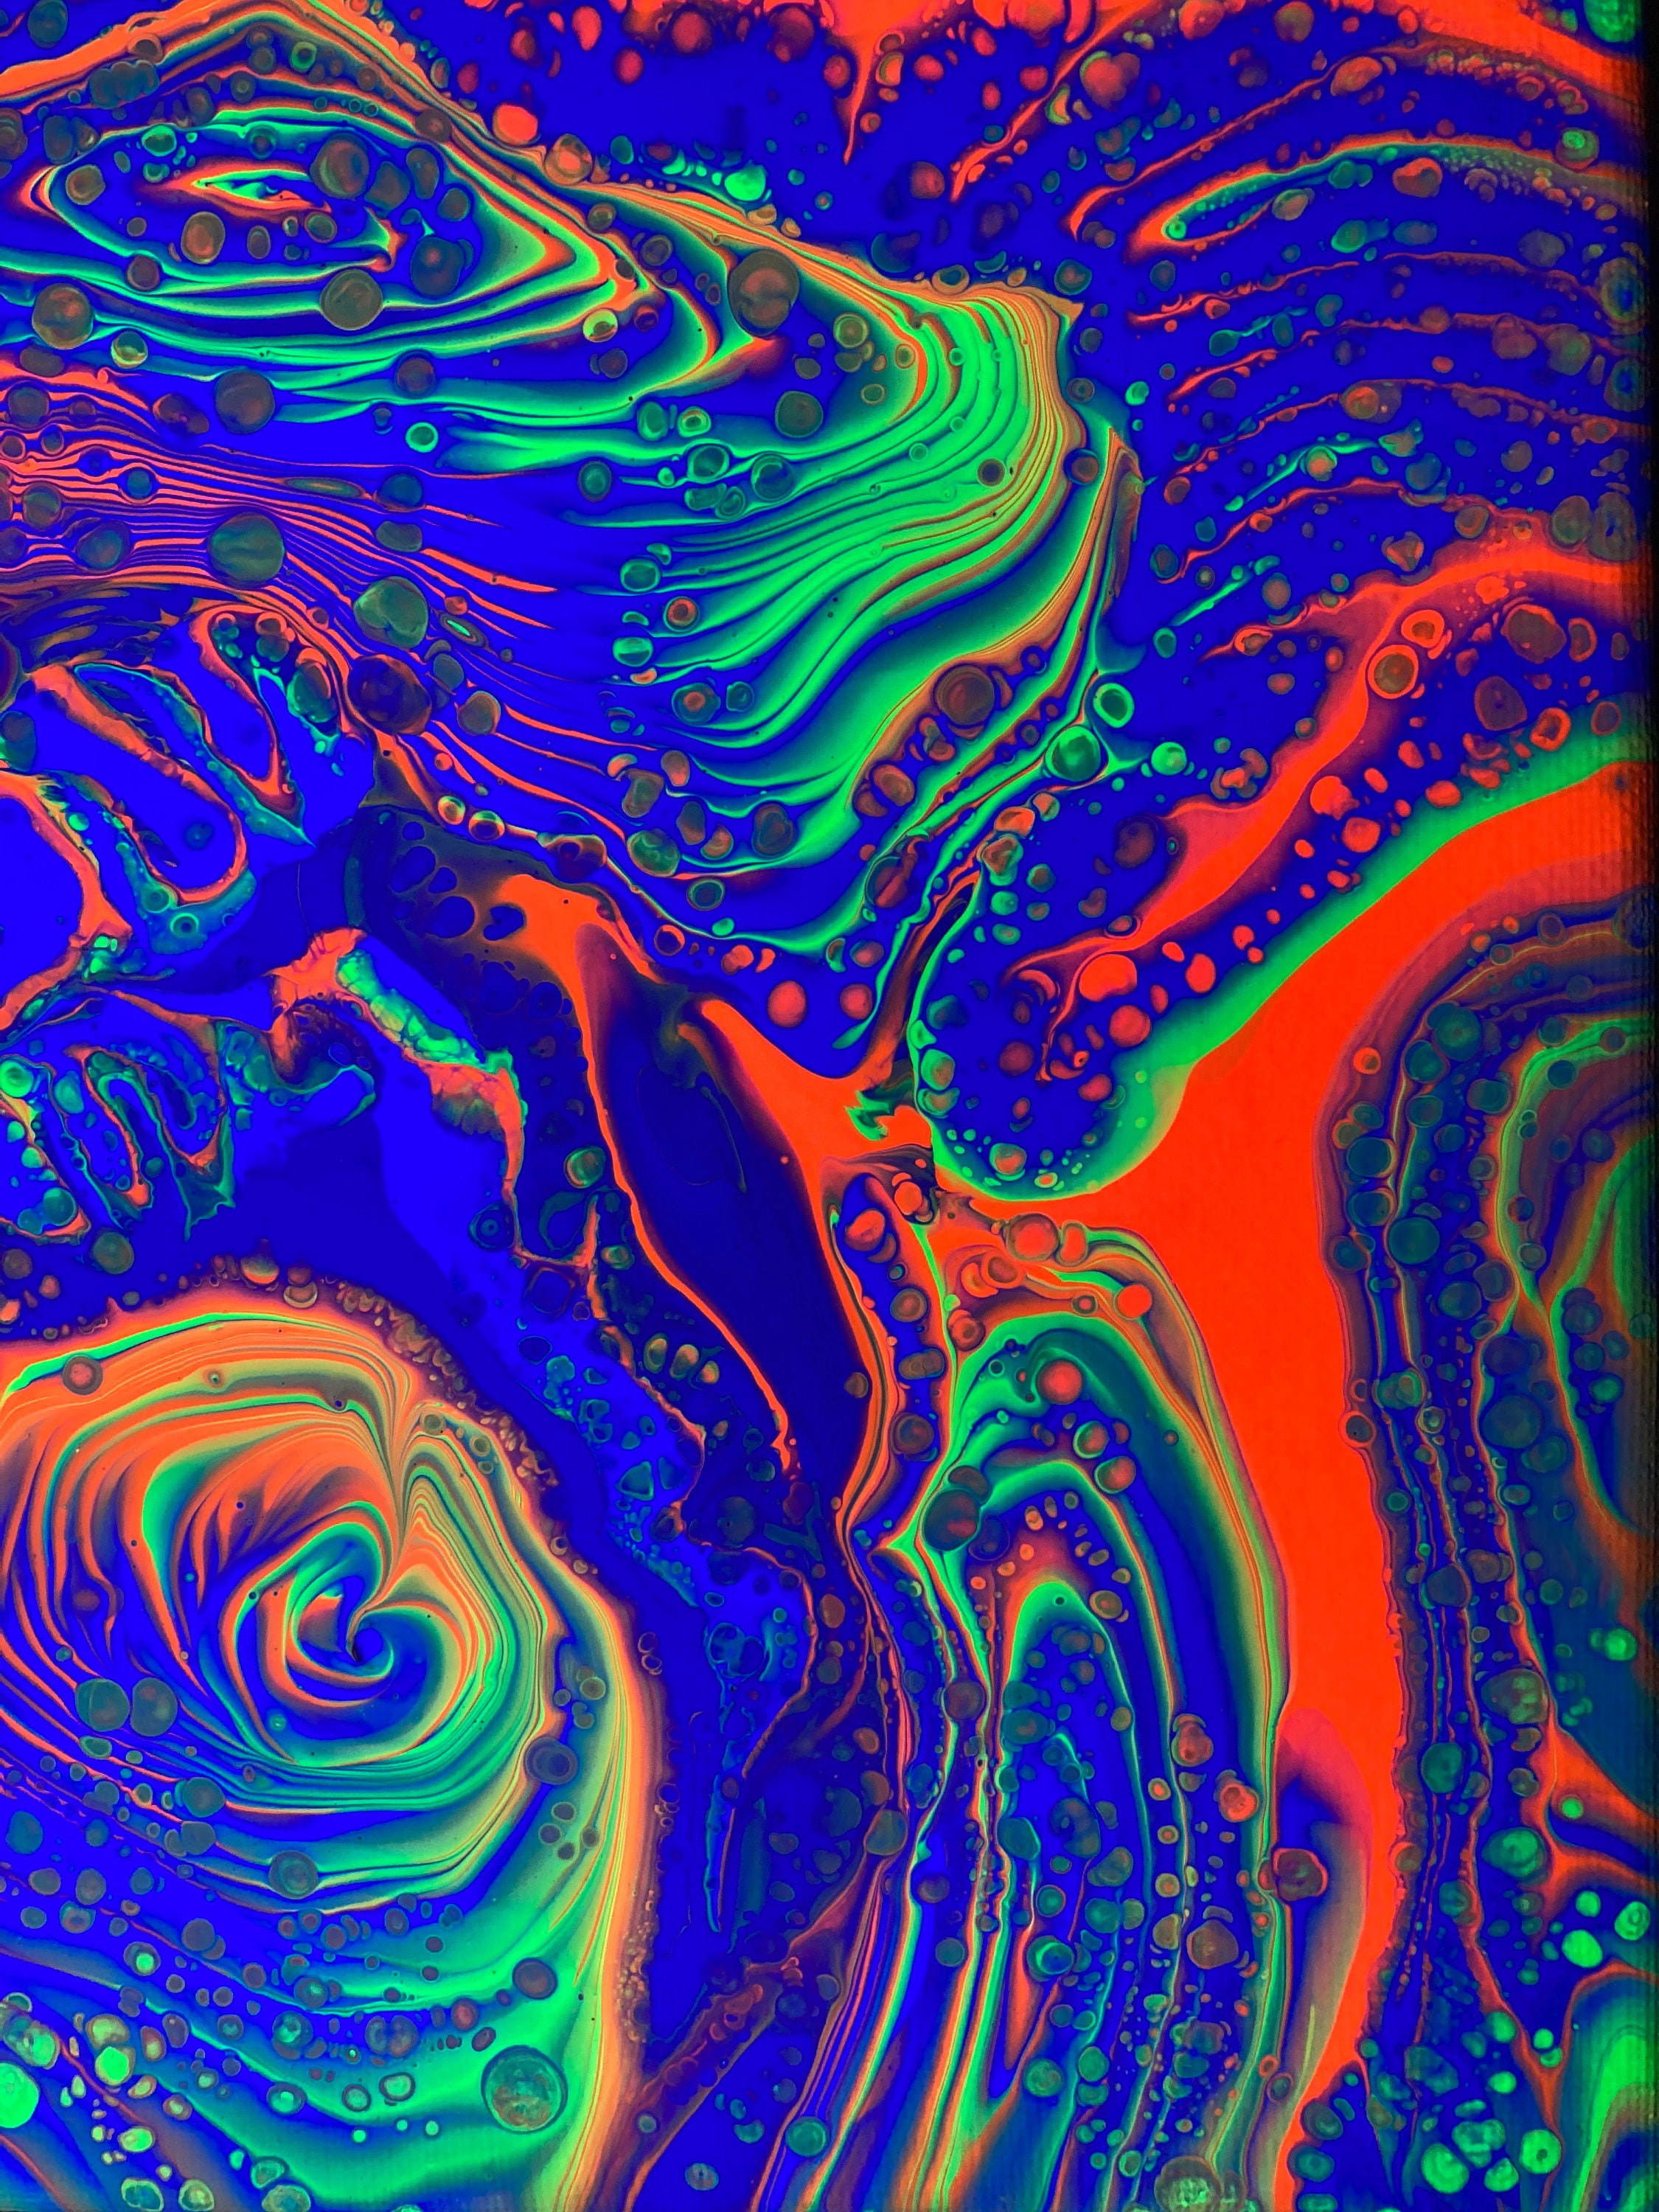 Ice Lava 8x8 UV Reactive Paint Pour on Stretched Canvas | Etsy